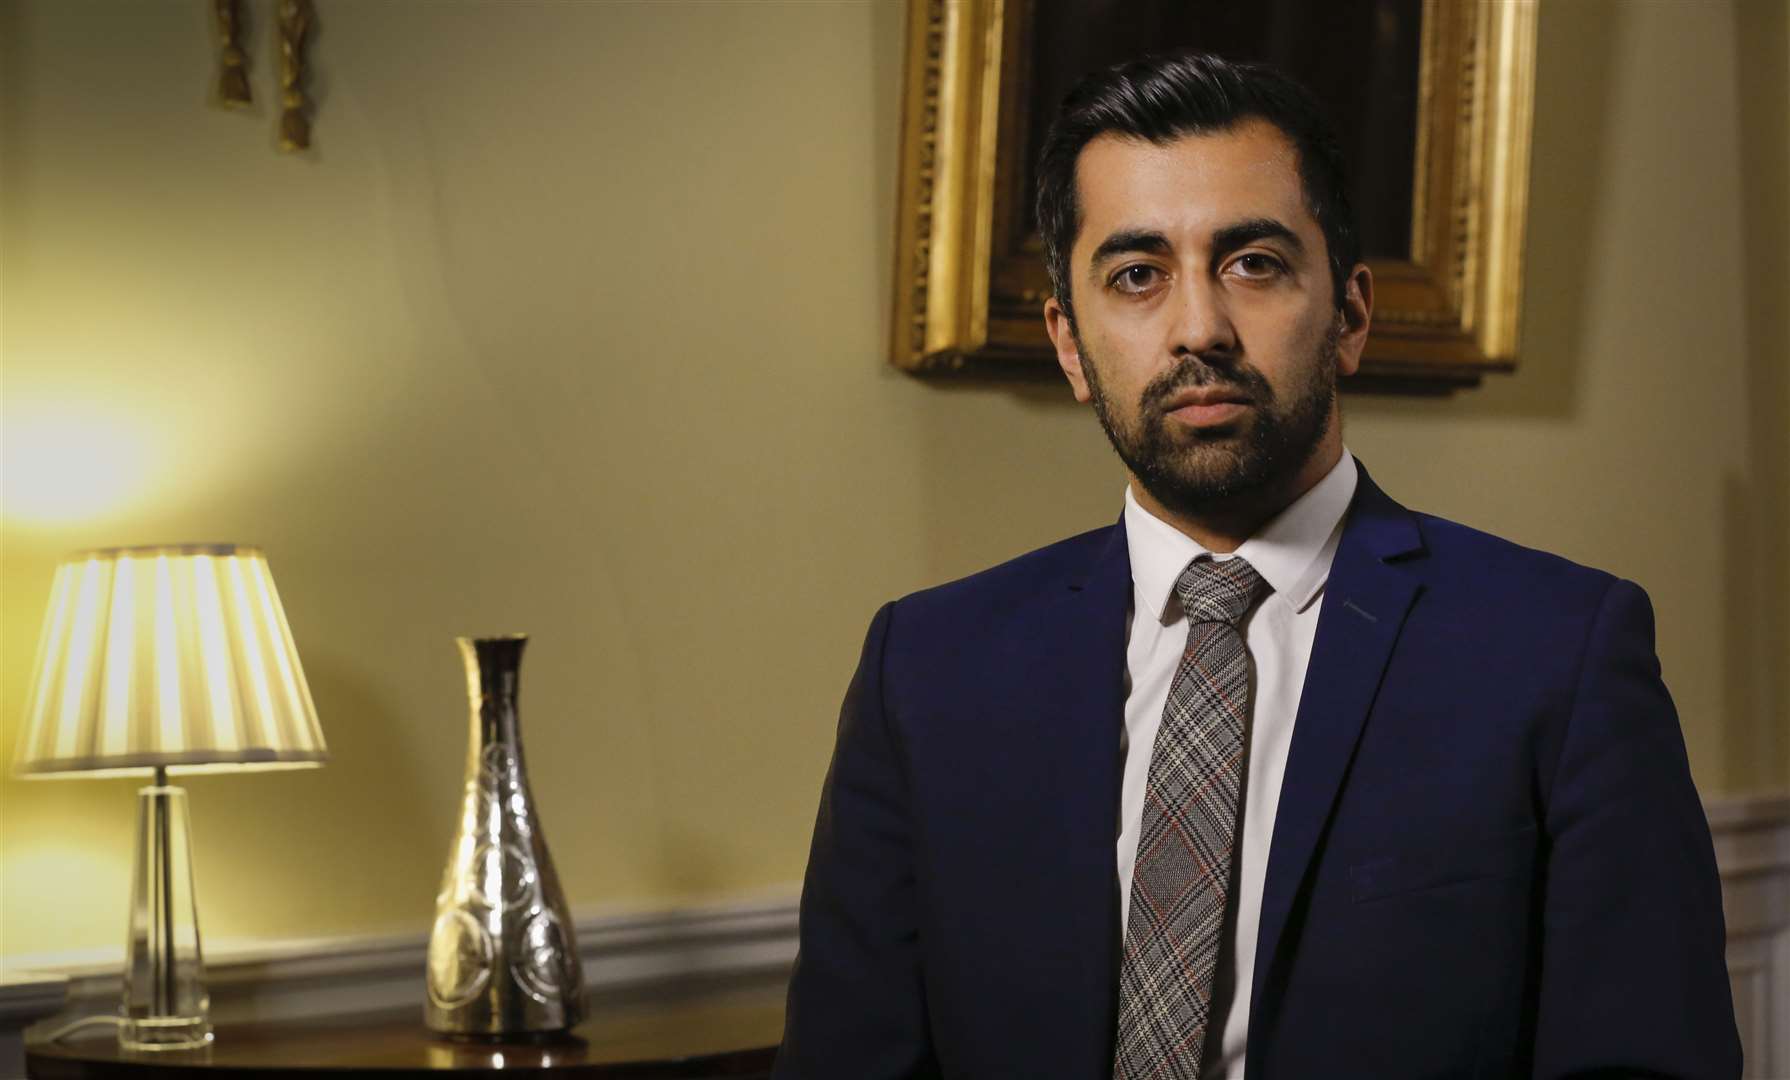 Health secretary Humza Yousaf will meet campaigners in Wick on Monday.